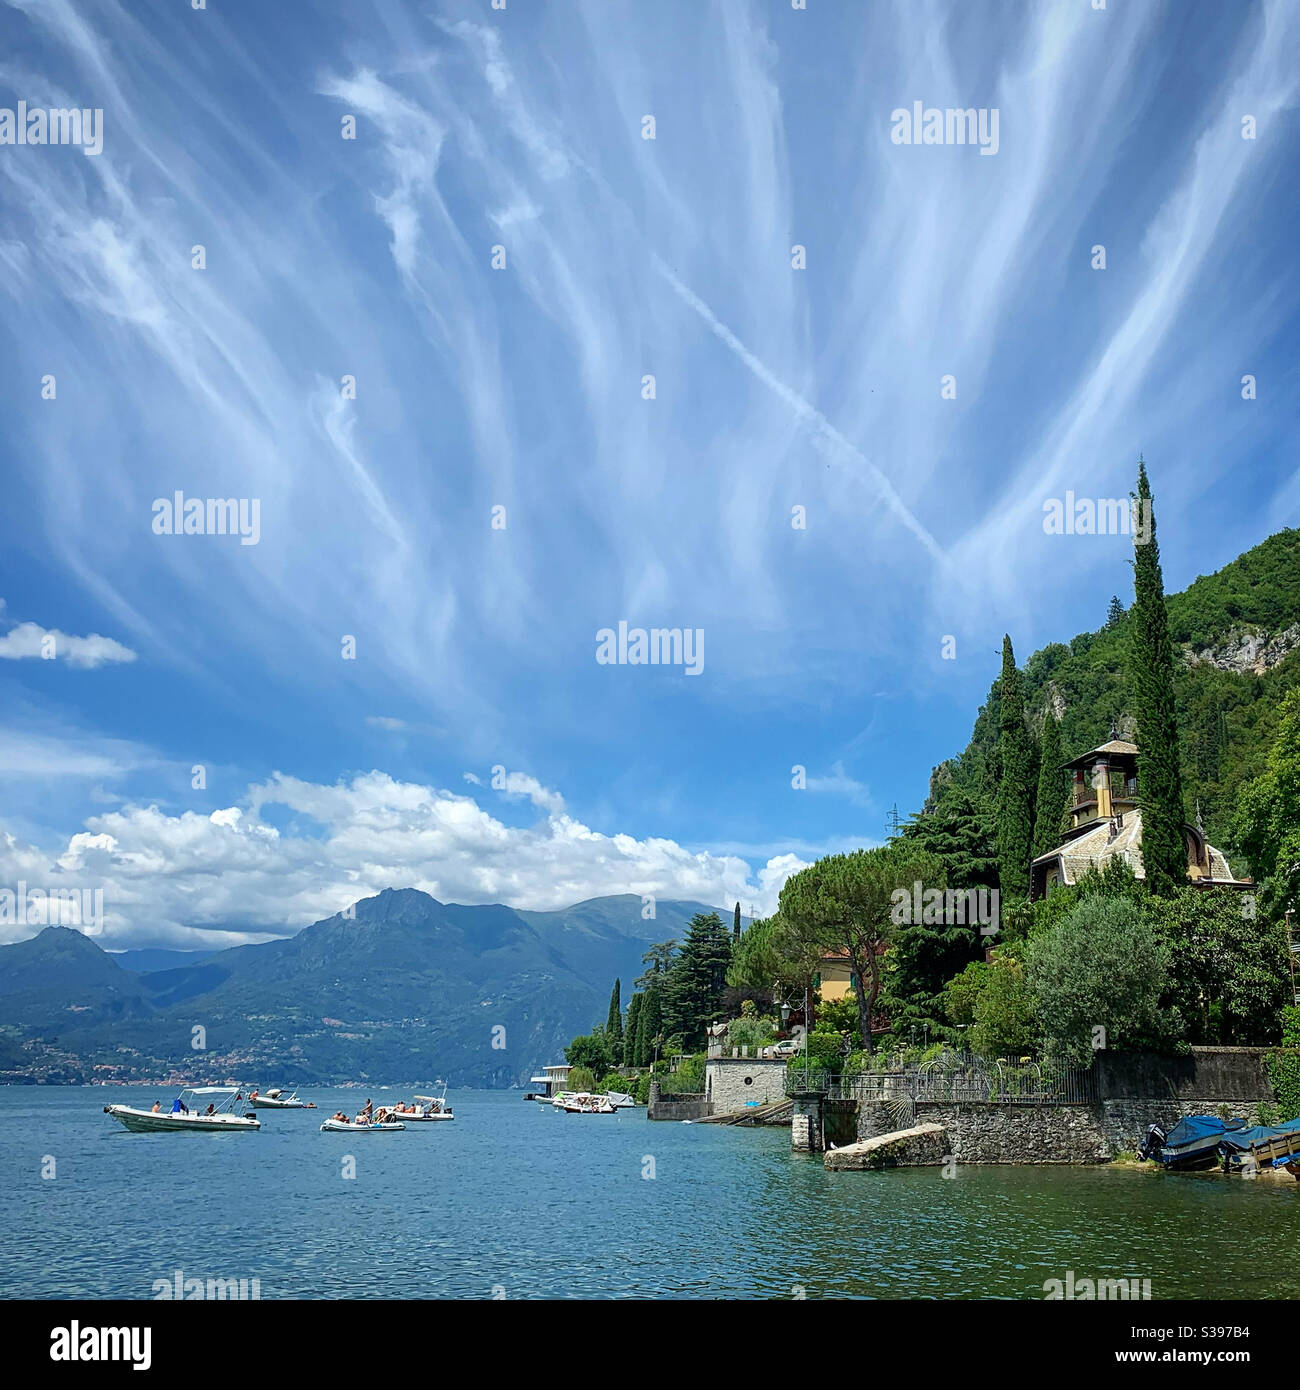 Stunning cloudscape over the lake Stock Photo